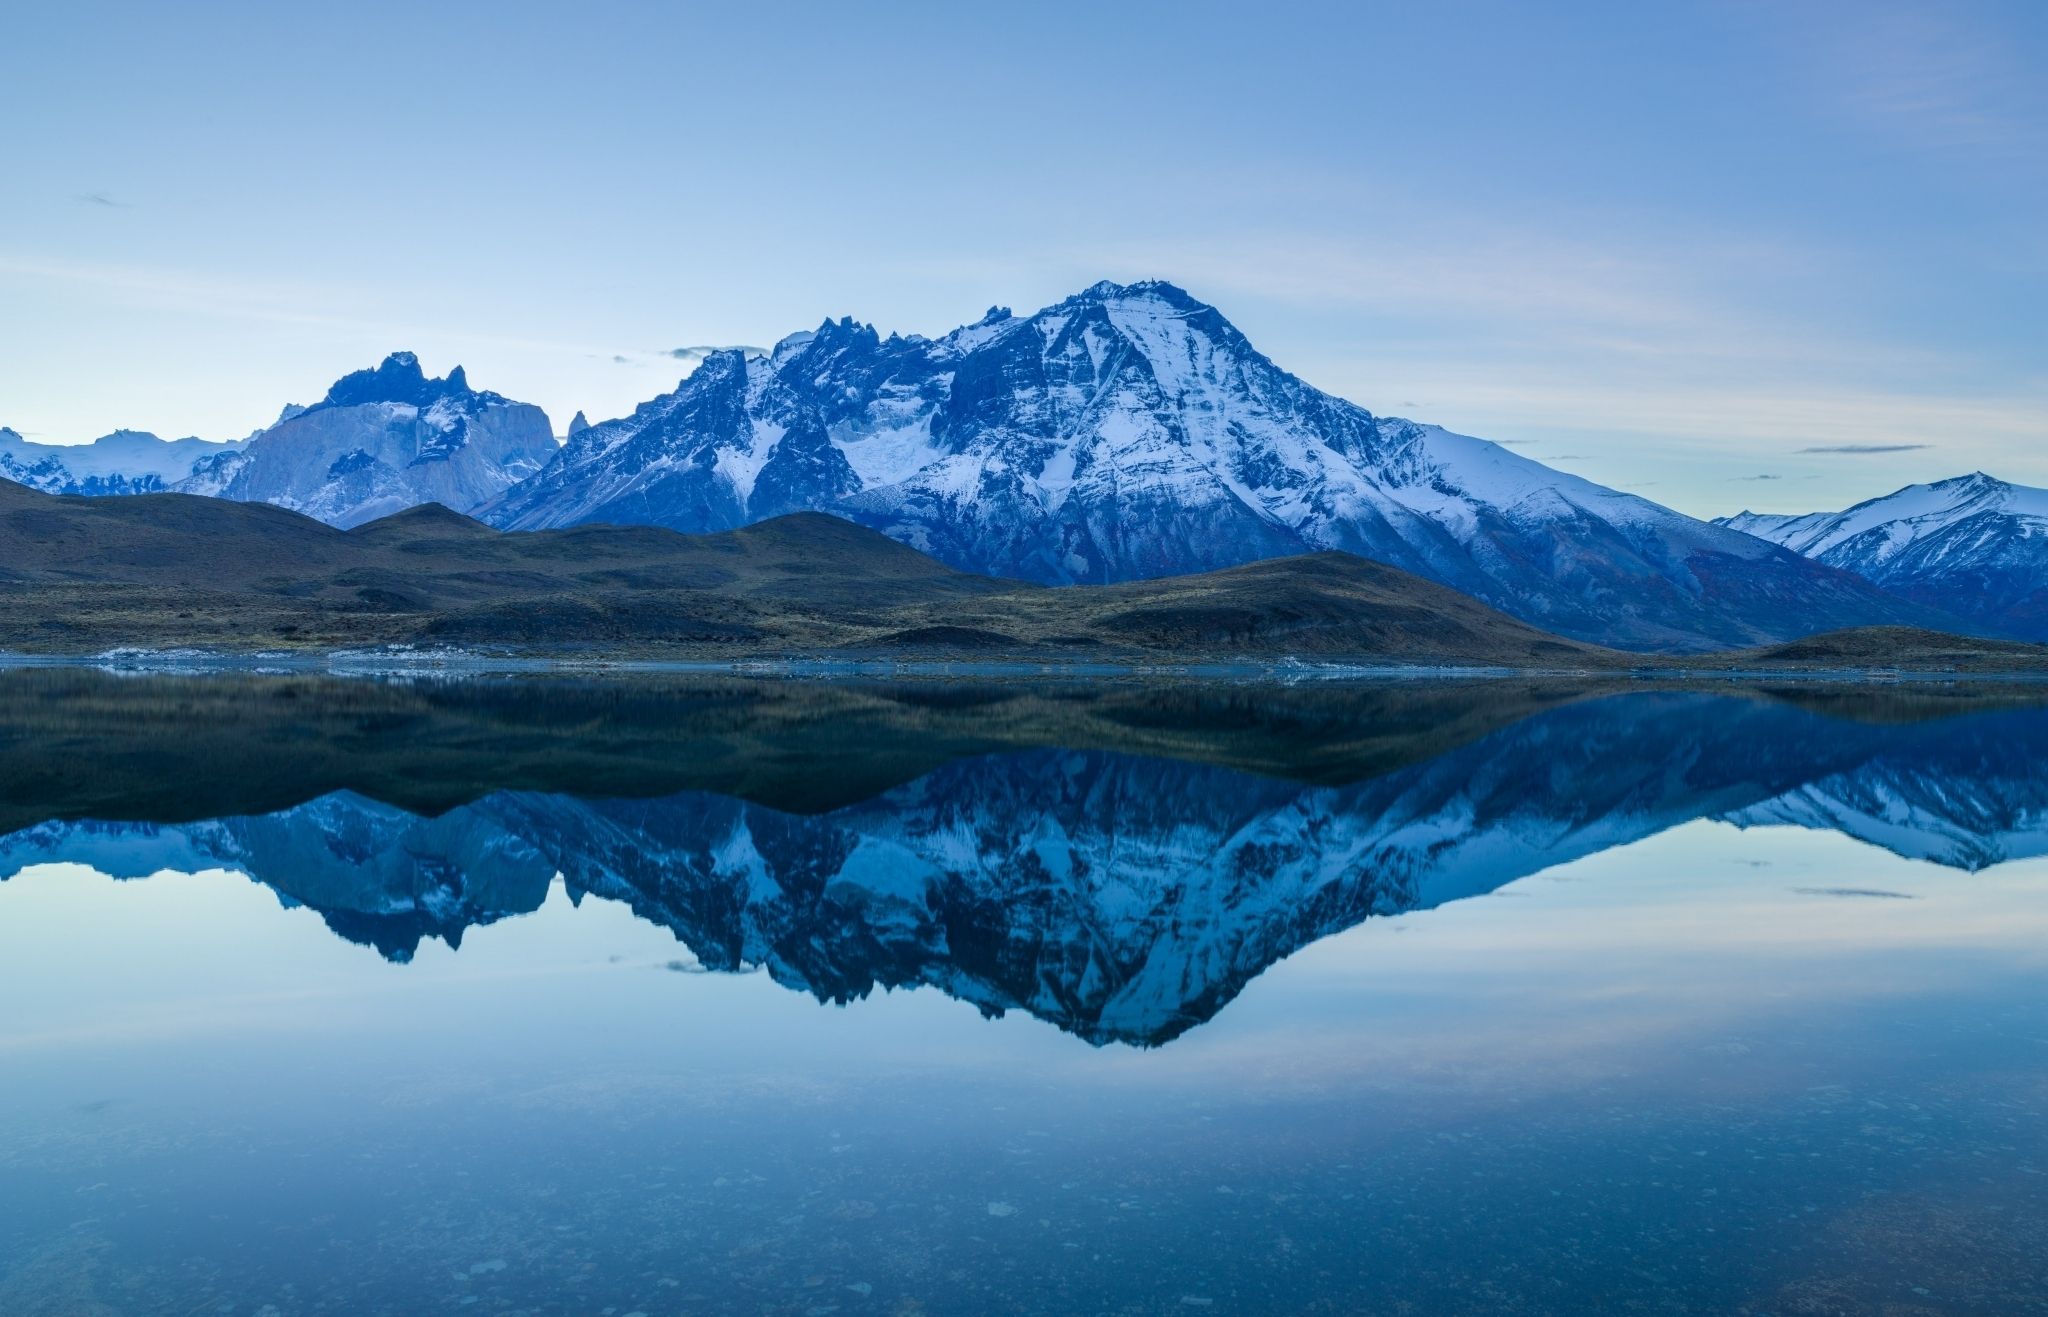 Breathtaking mountain view a perfect destination for family travel in South America